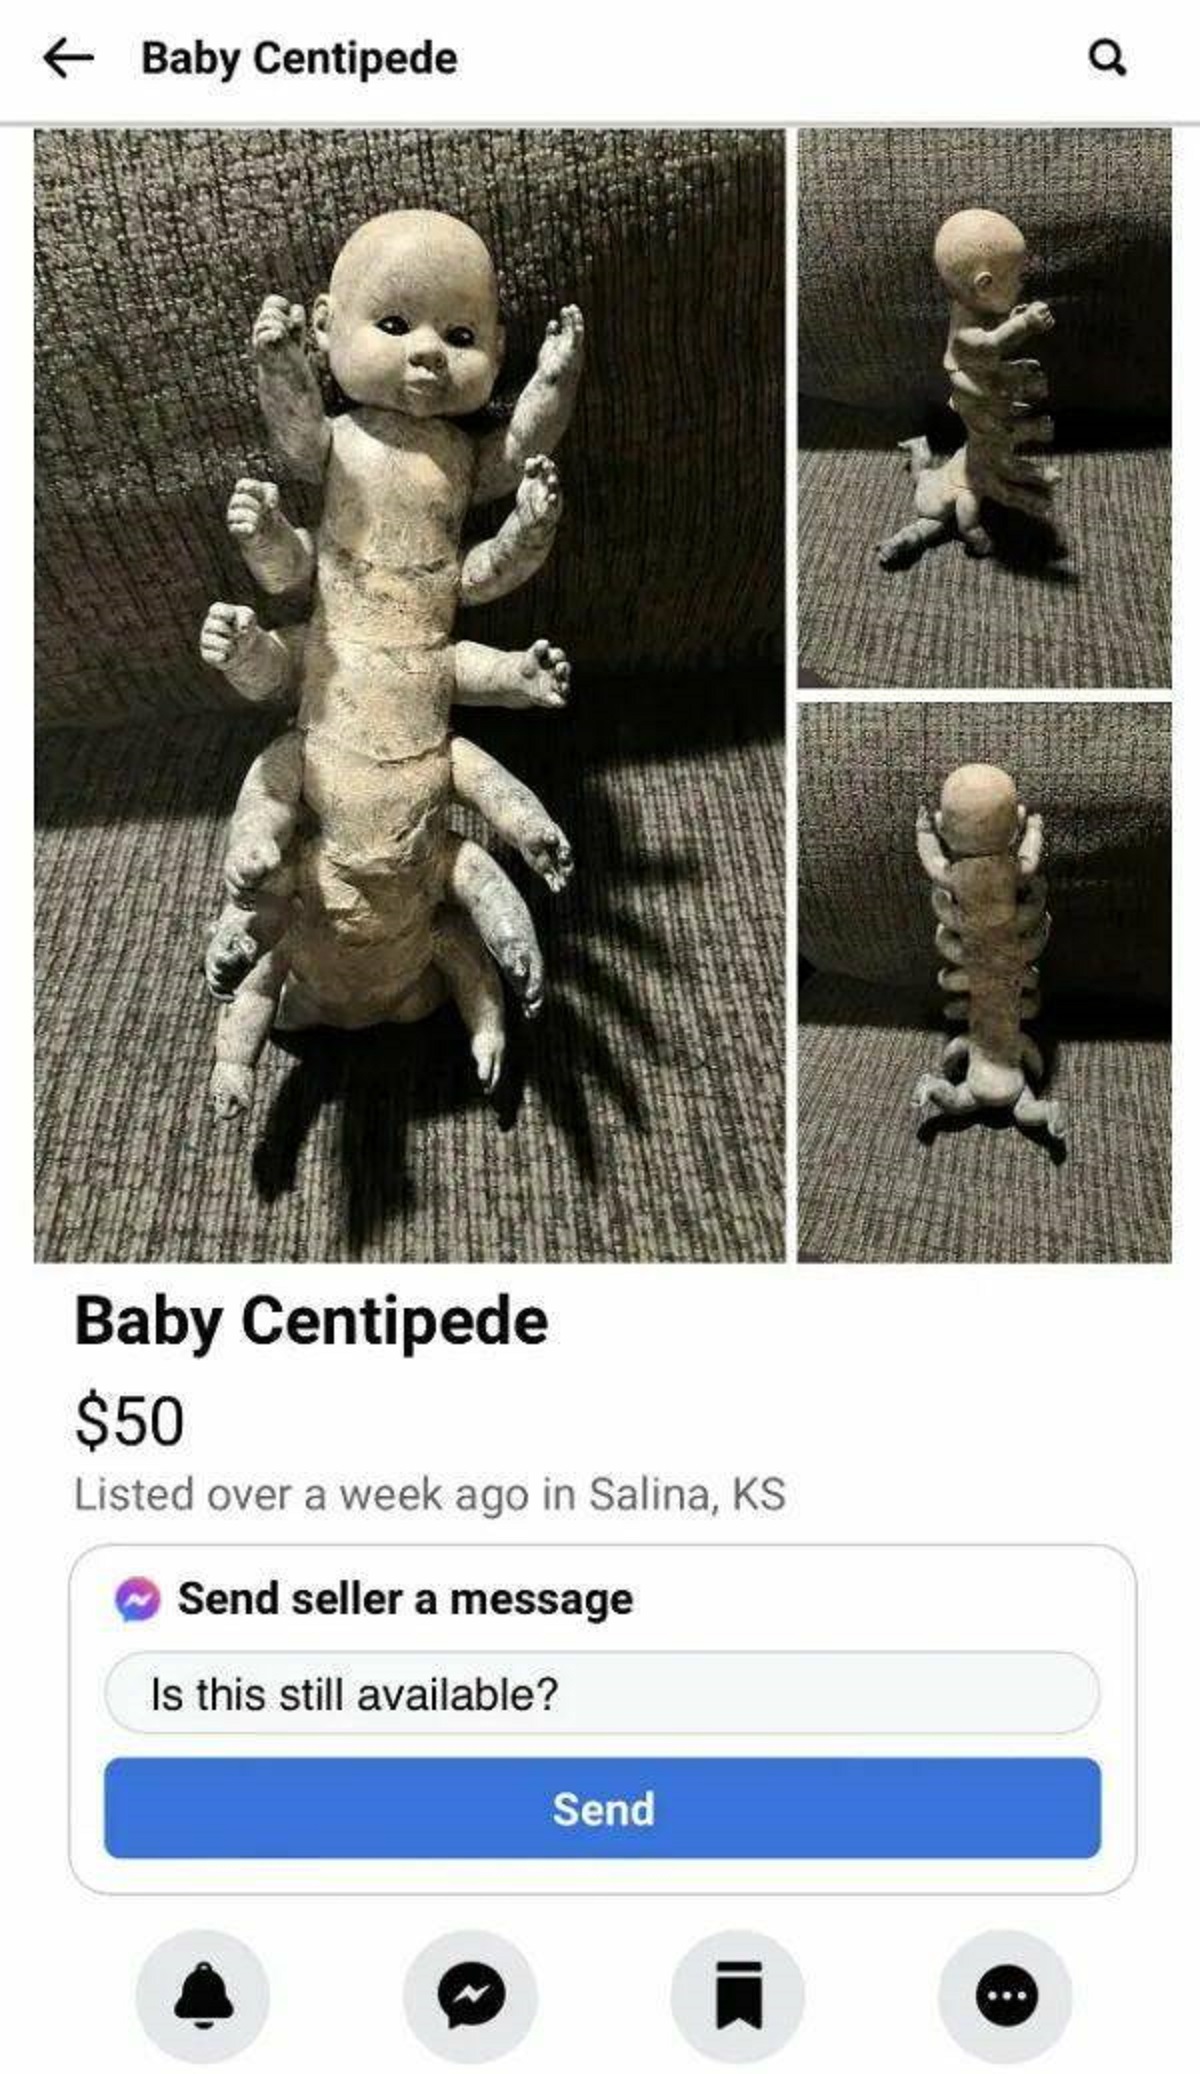 figurine - Baby Centipede 0 Baby Centipede $50 Listed over a week ago in Salina, Ks Send seller a message Is this still available? Send i